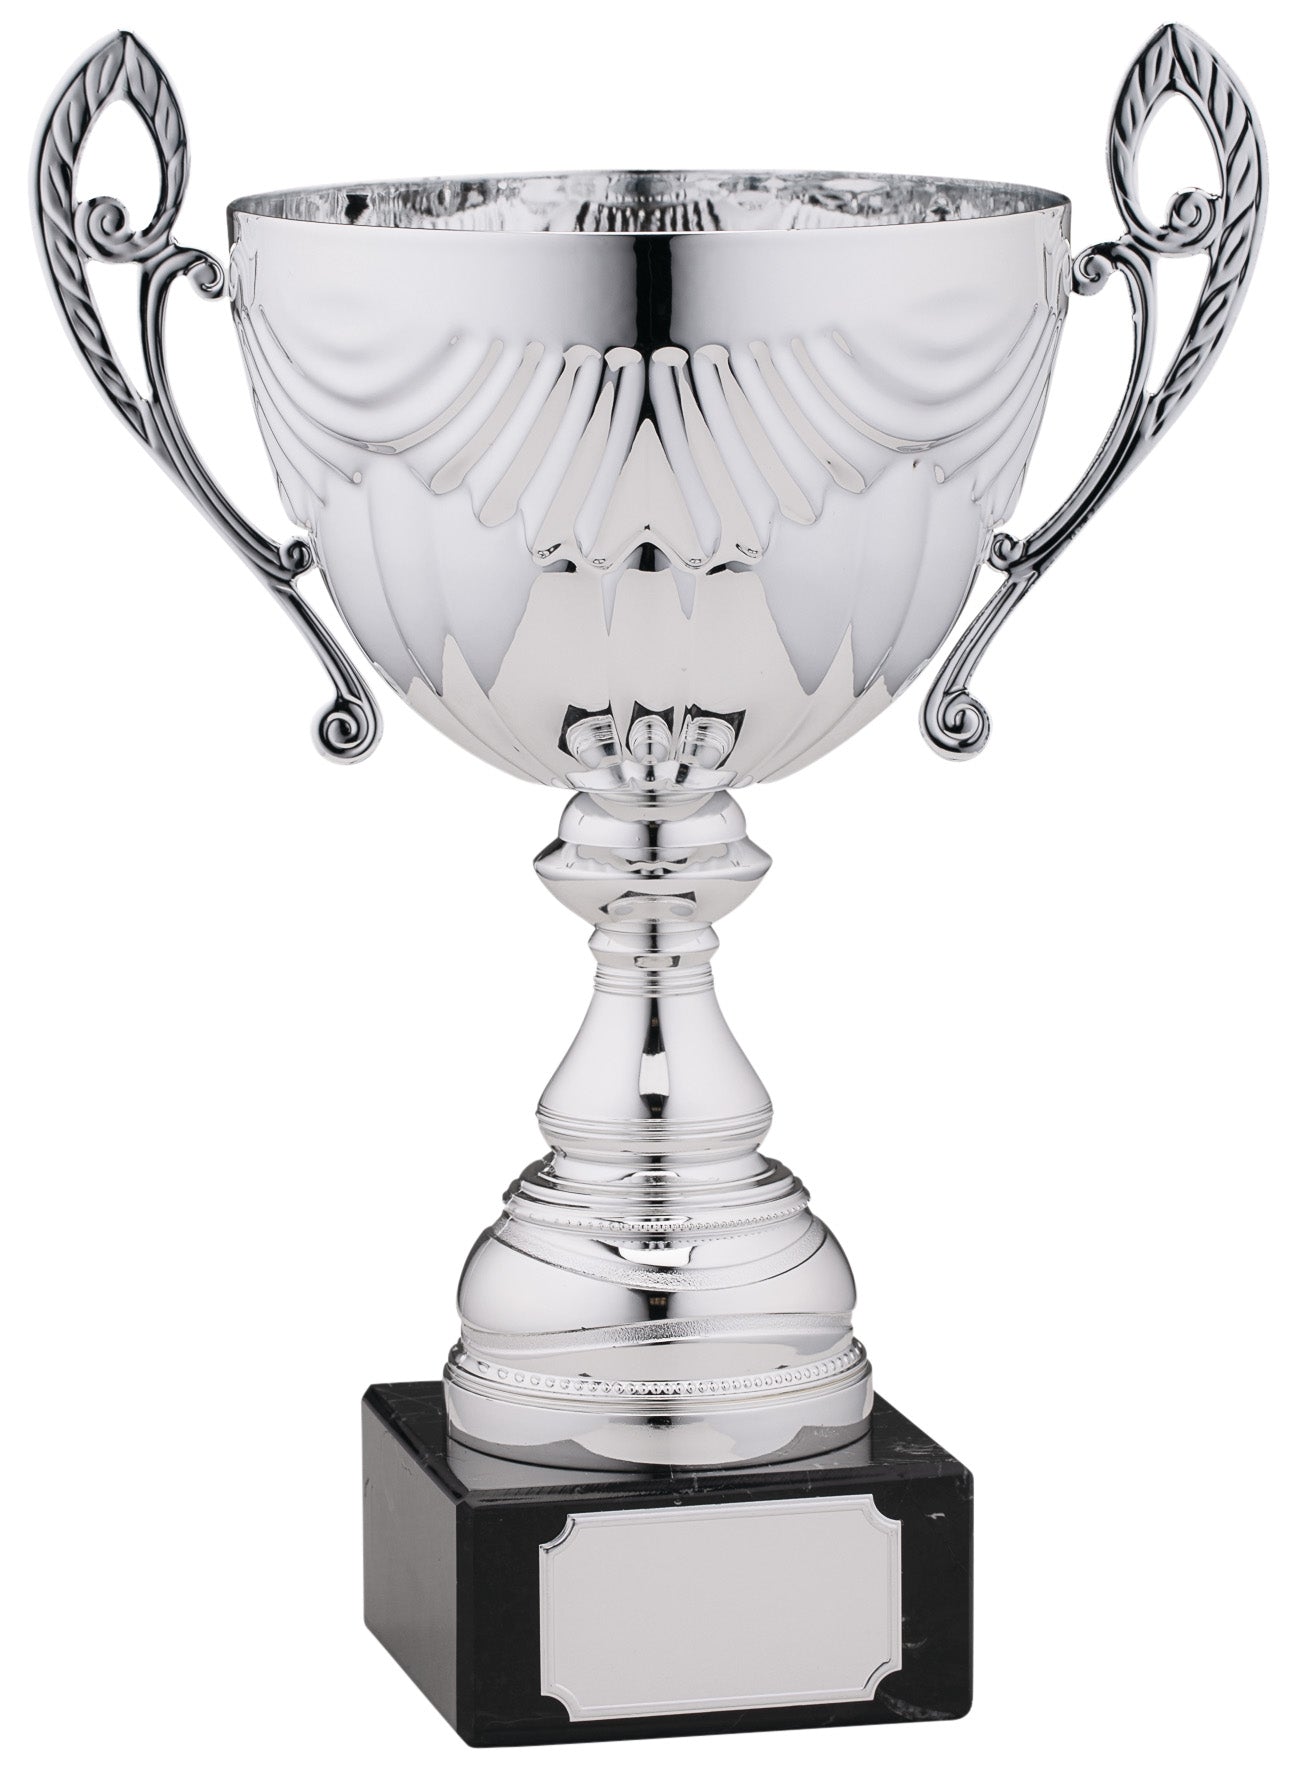 Ornate Series Silver Metal Trophy Cup on Marble Base